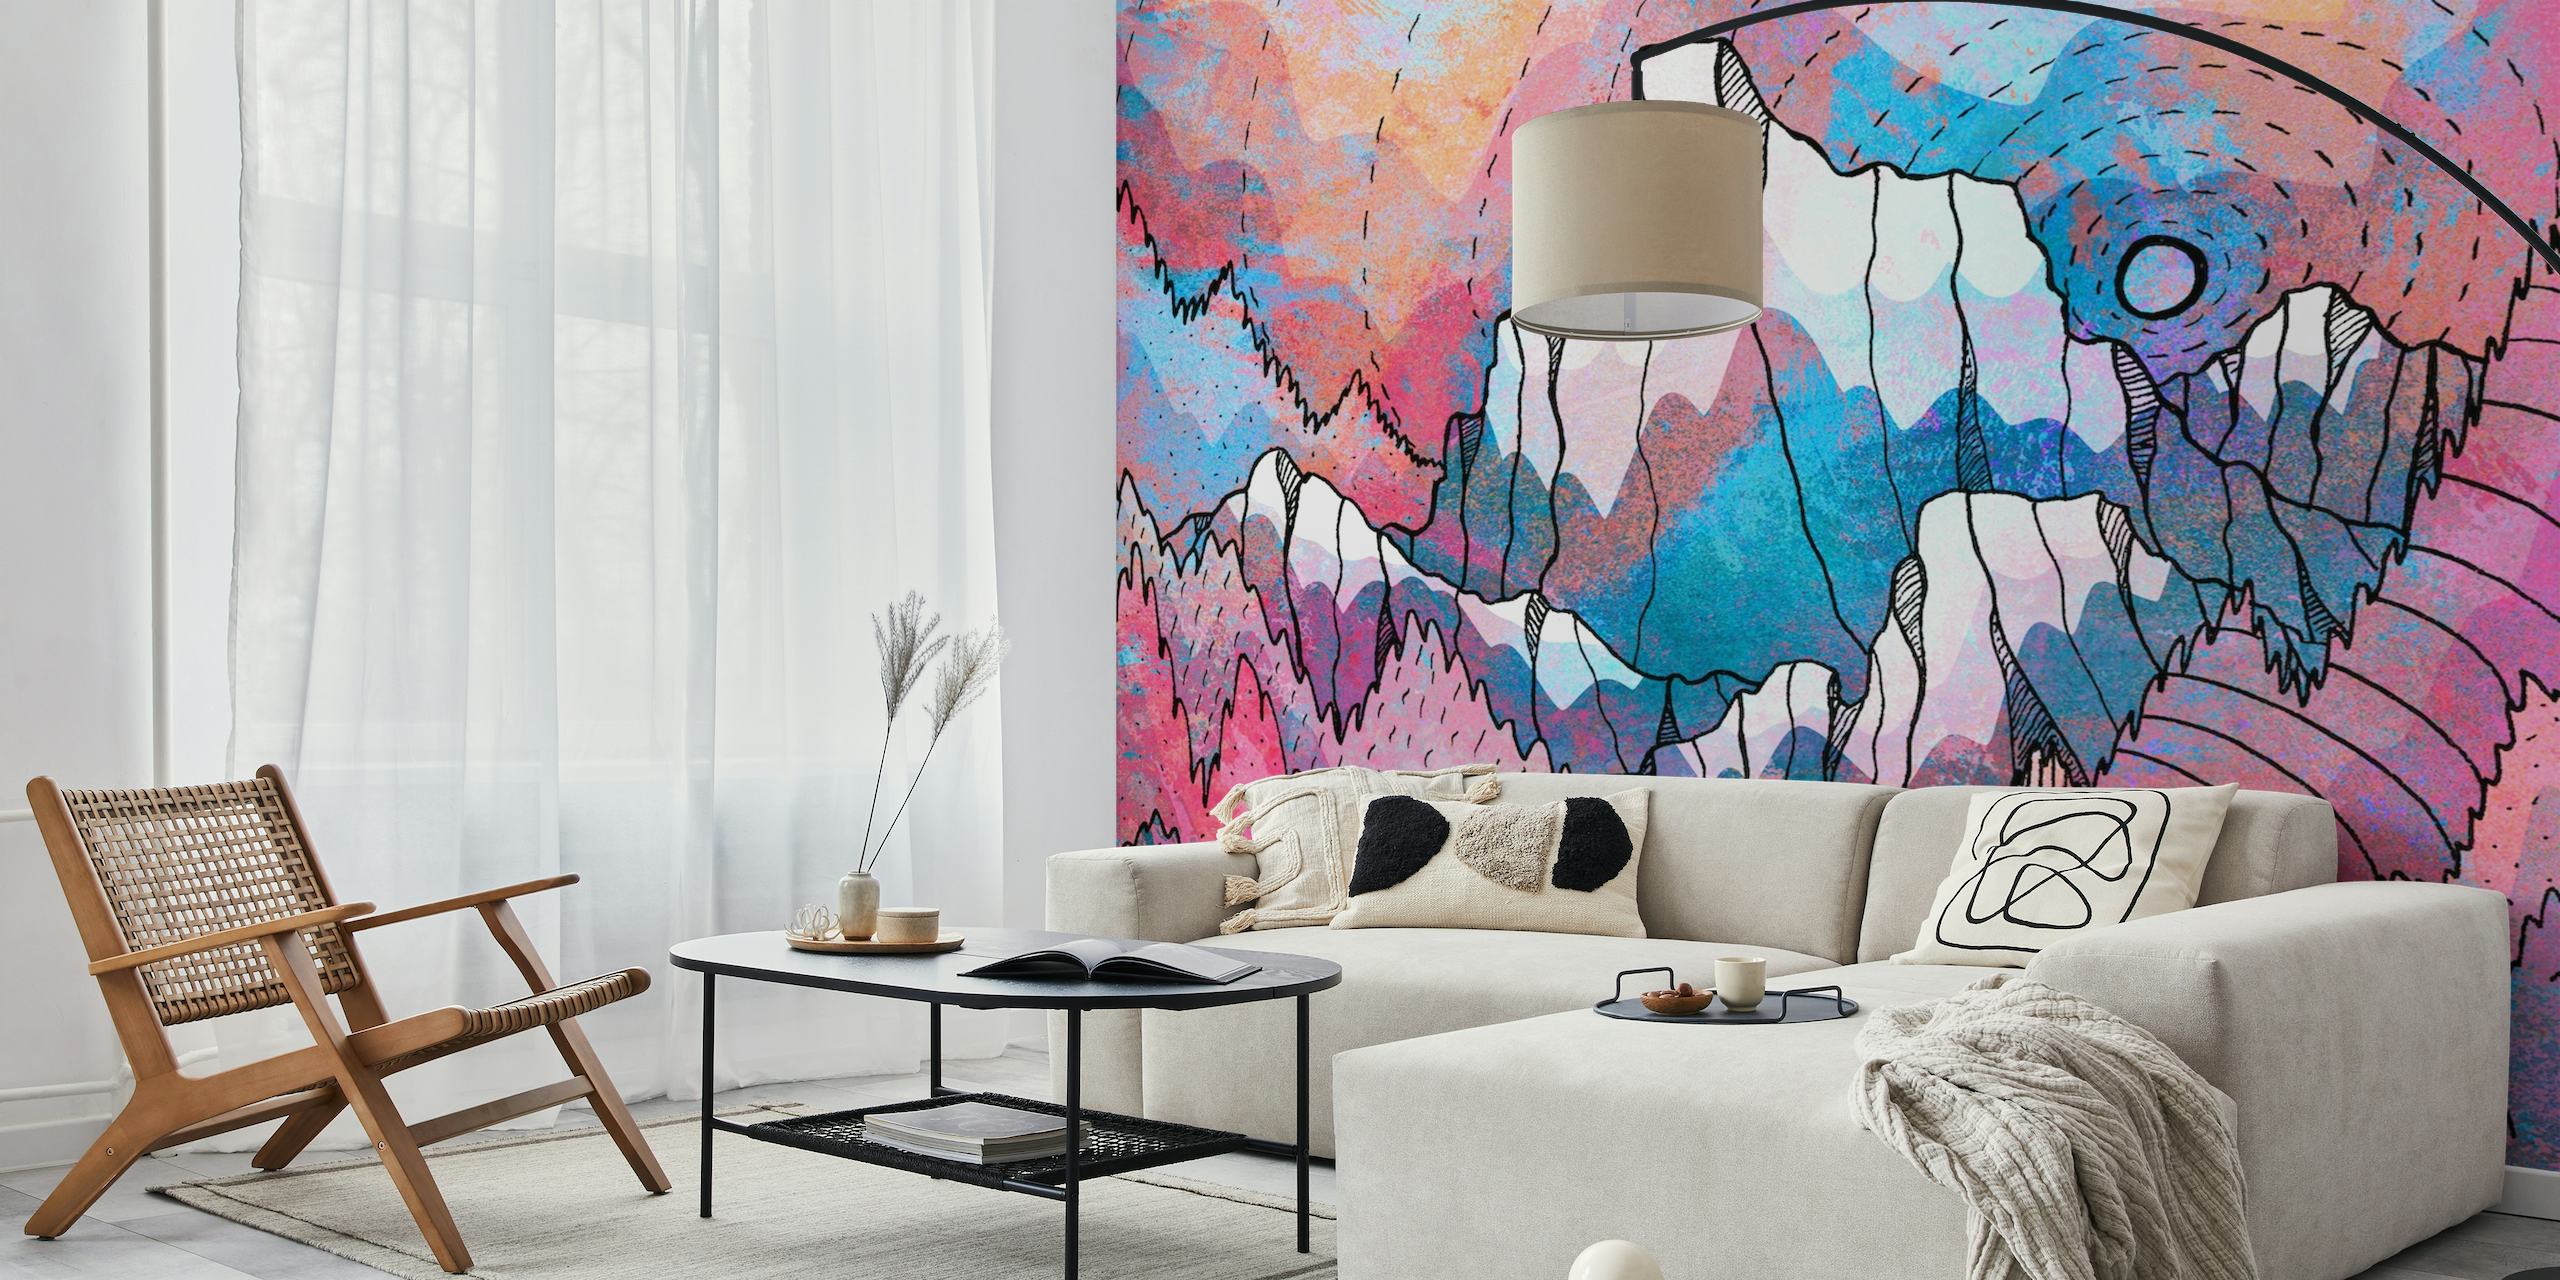 Abstract wall mural of a stream flowing through a colorful, textured landscape